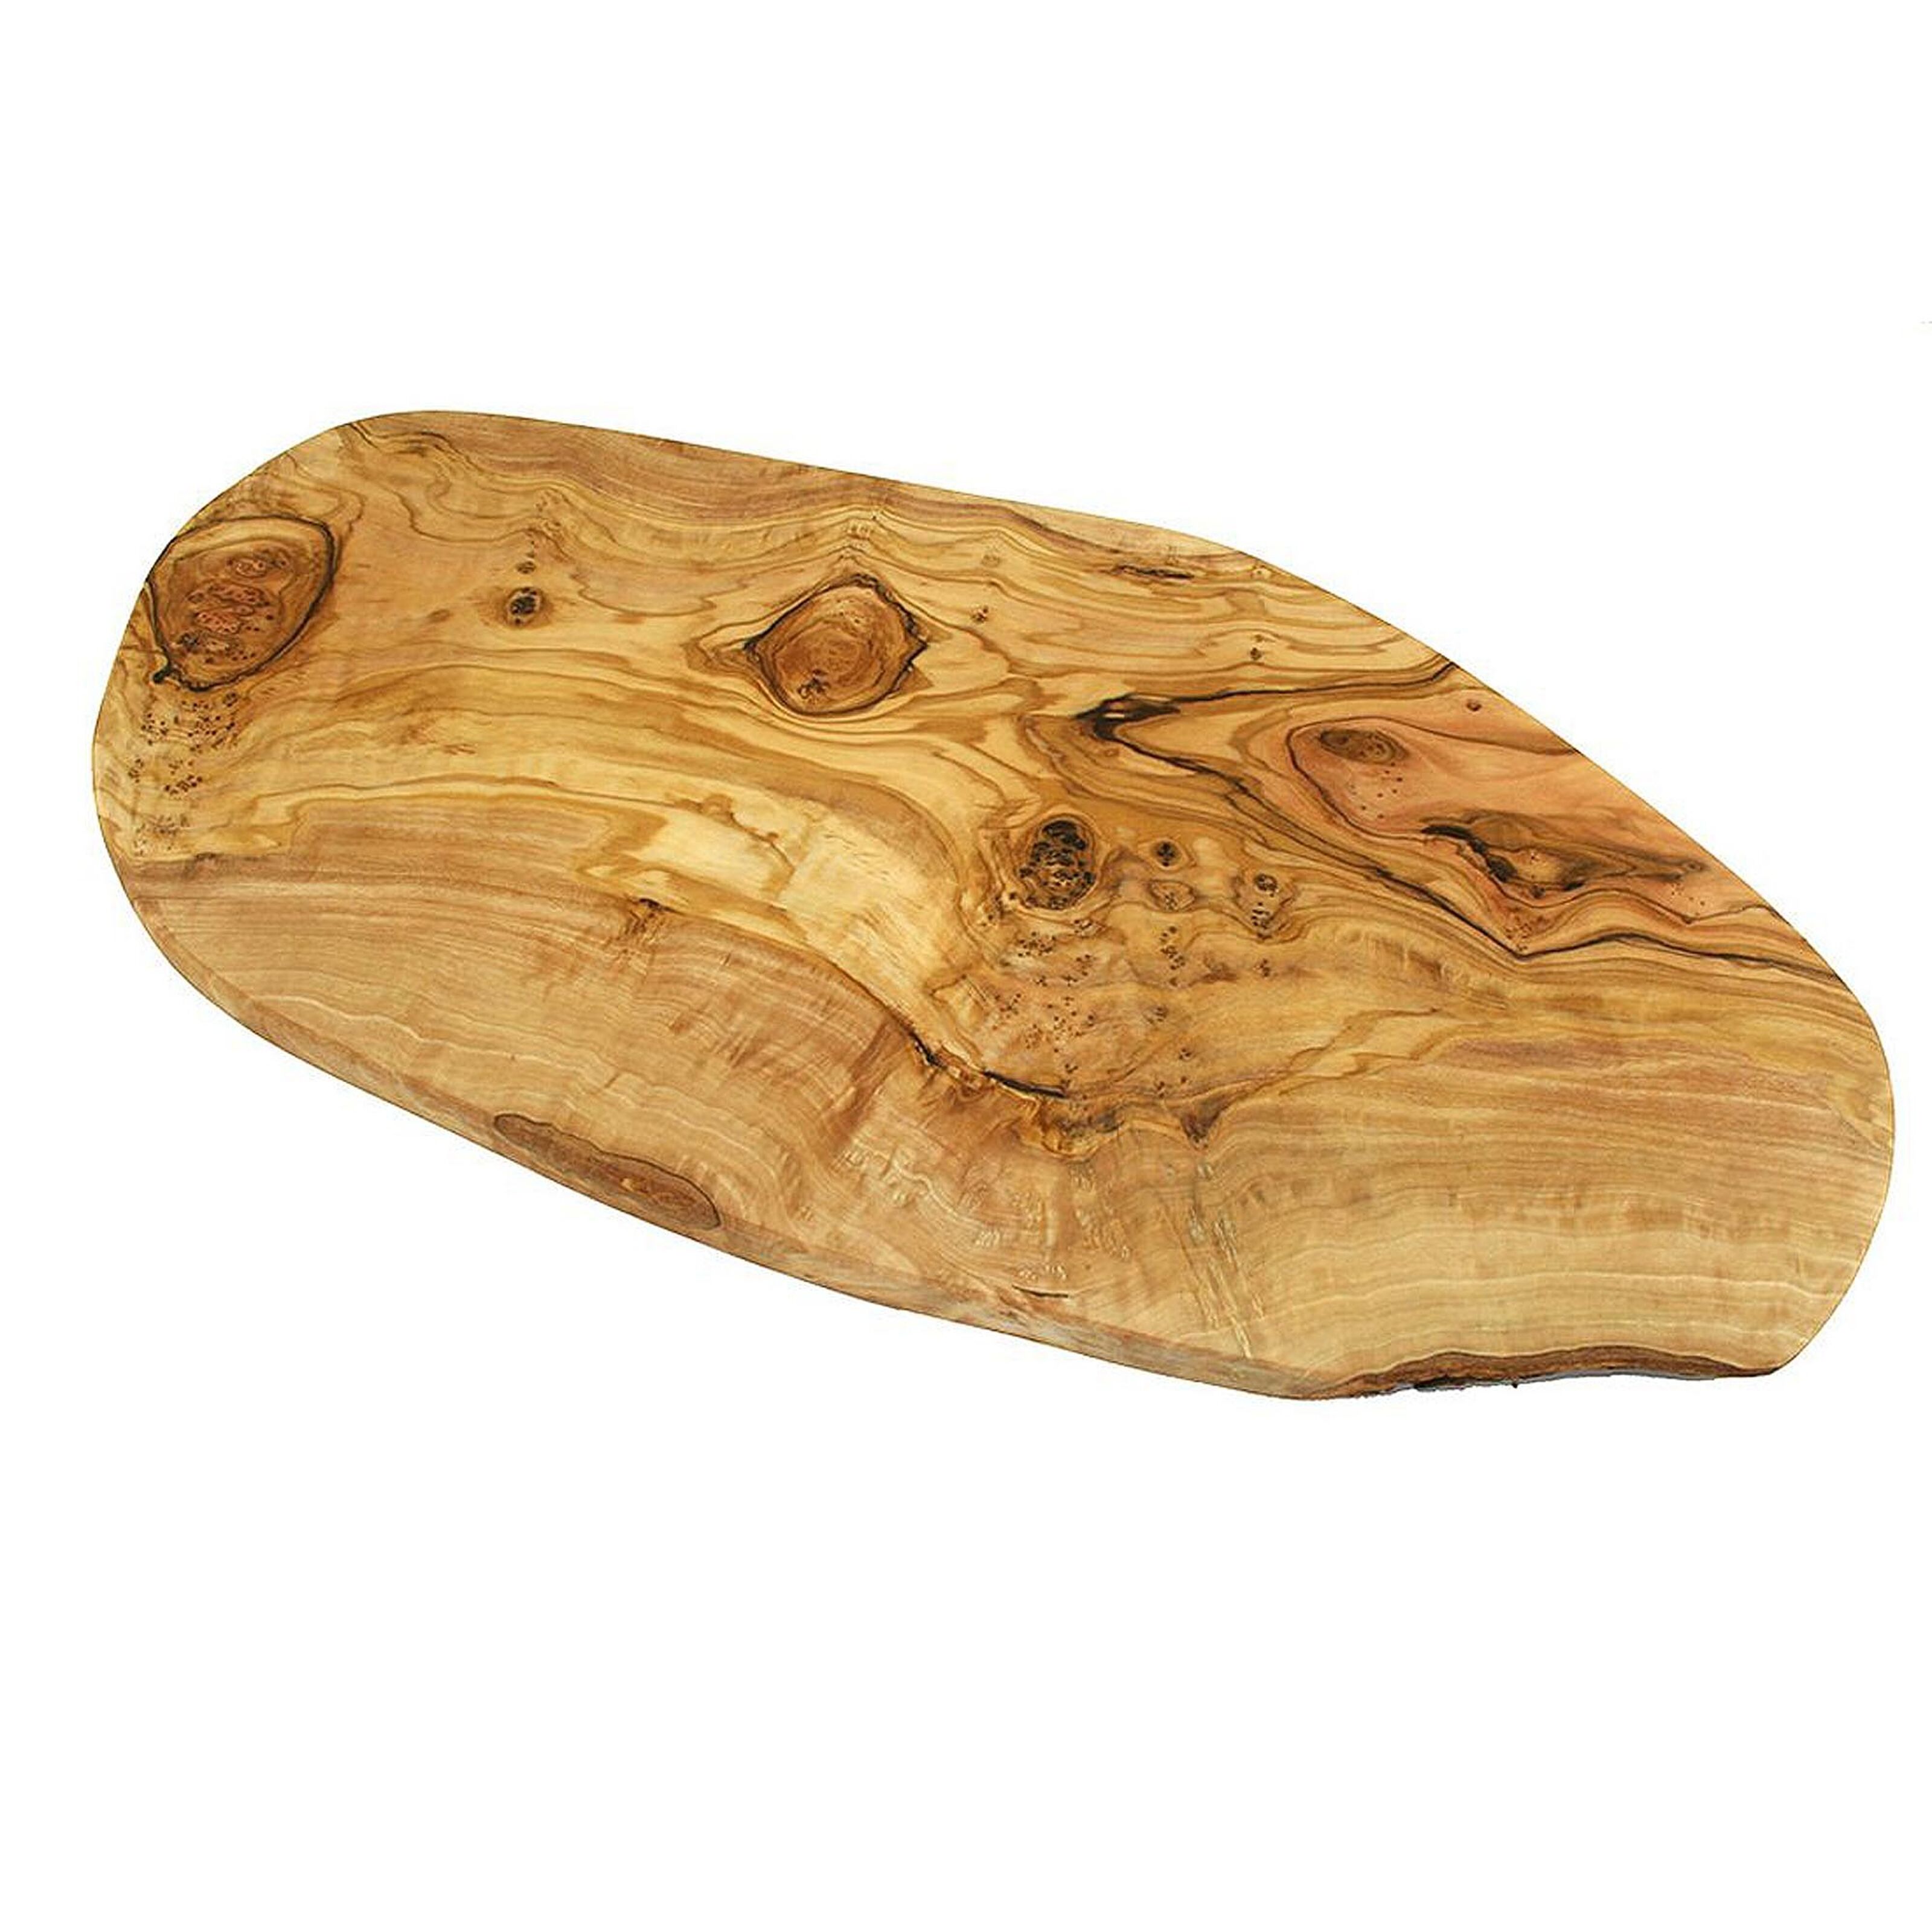 Buy wholesale RUSTIC cutting or serving board (length: approx. 25 - 29 cm),  olive wood